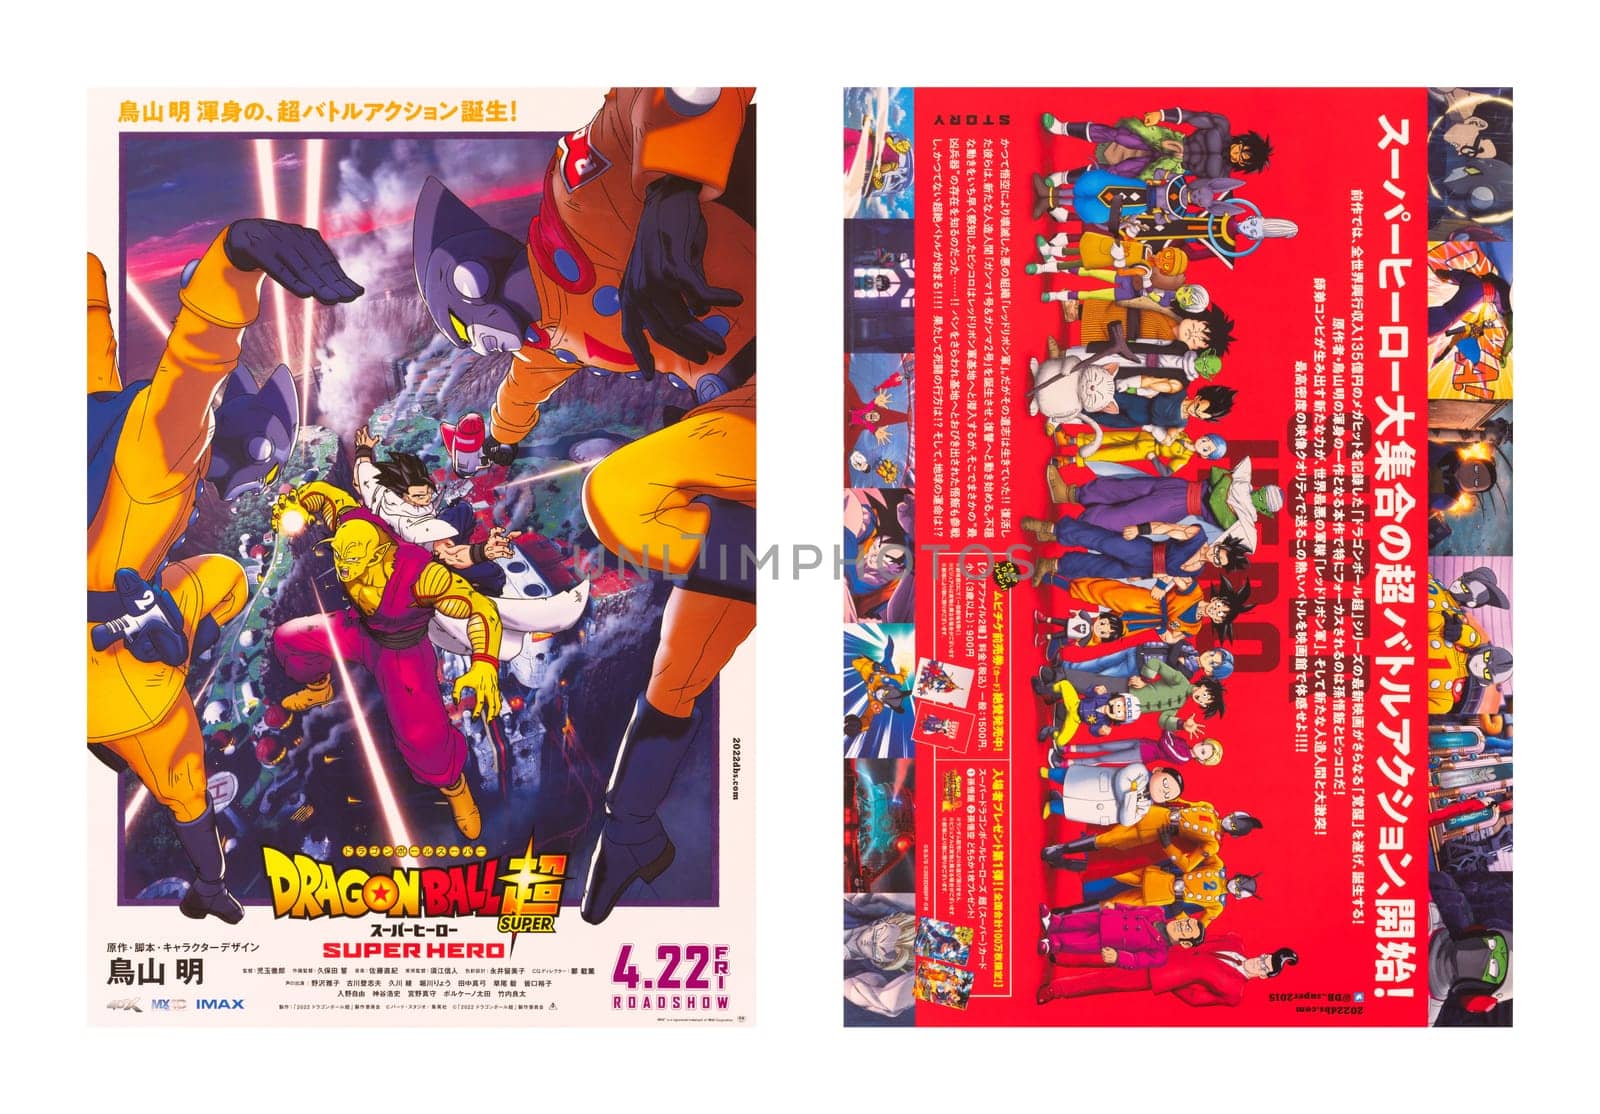 tokyo, japan - apr 22 2022: 2nd teaser visual leaflet (left: front) for the 2022 anime film "Dragon Ball Super: Super Hero" designed by the late Akira Toriyama given at no charge in Japanese theaters.